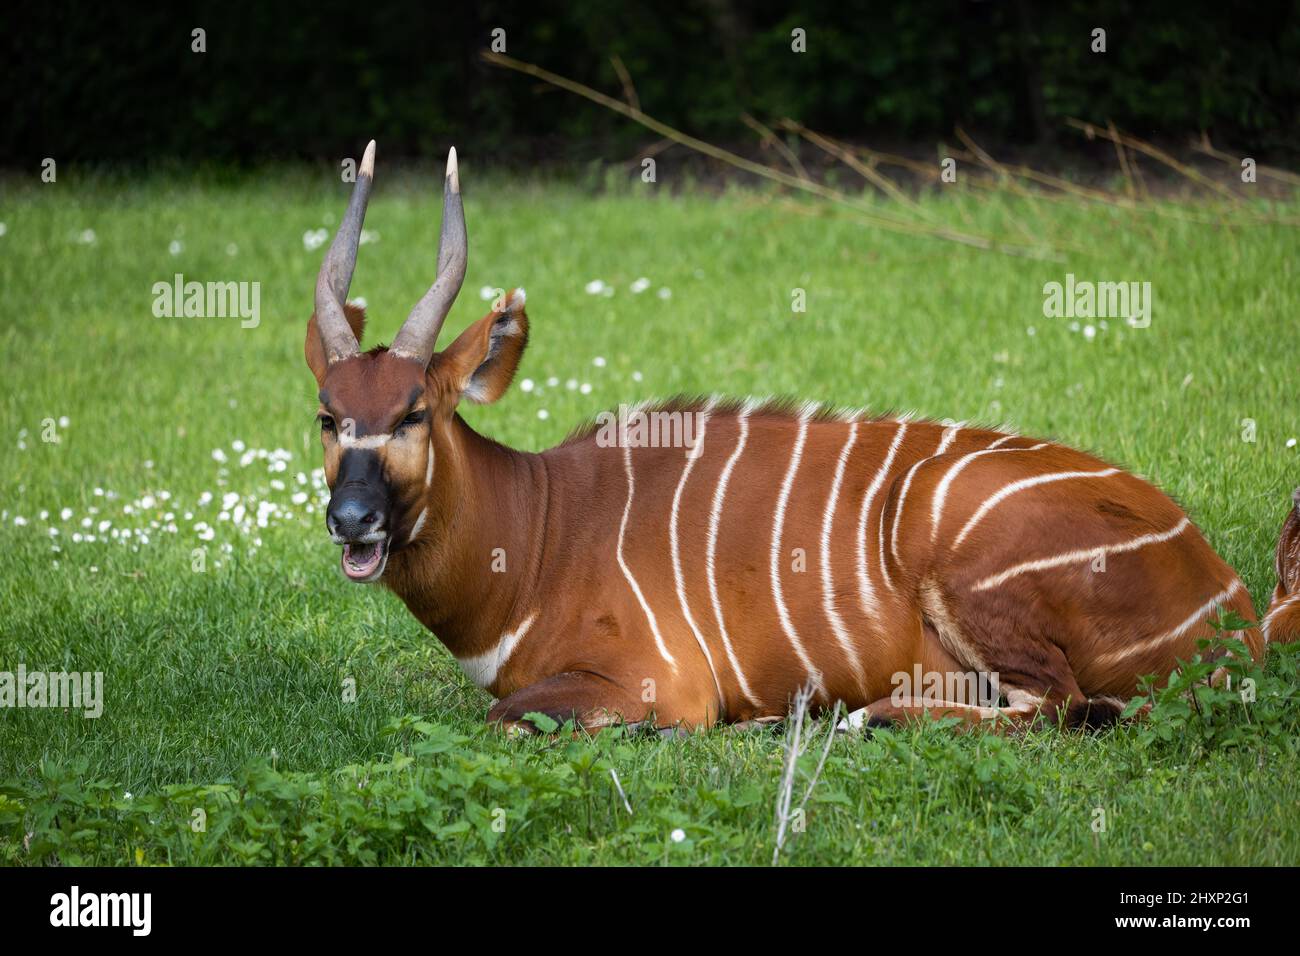 Eastern Bongo (Tragelaphus eurycerus isaaci) lying on the grass, African forest antelope in the family Bovidae. Stock Photo